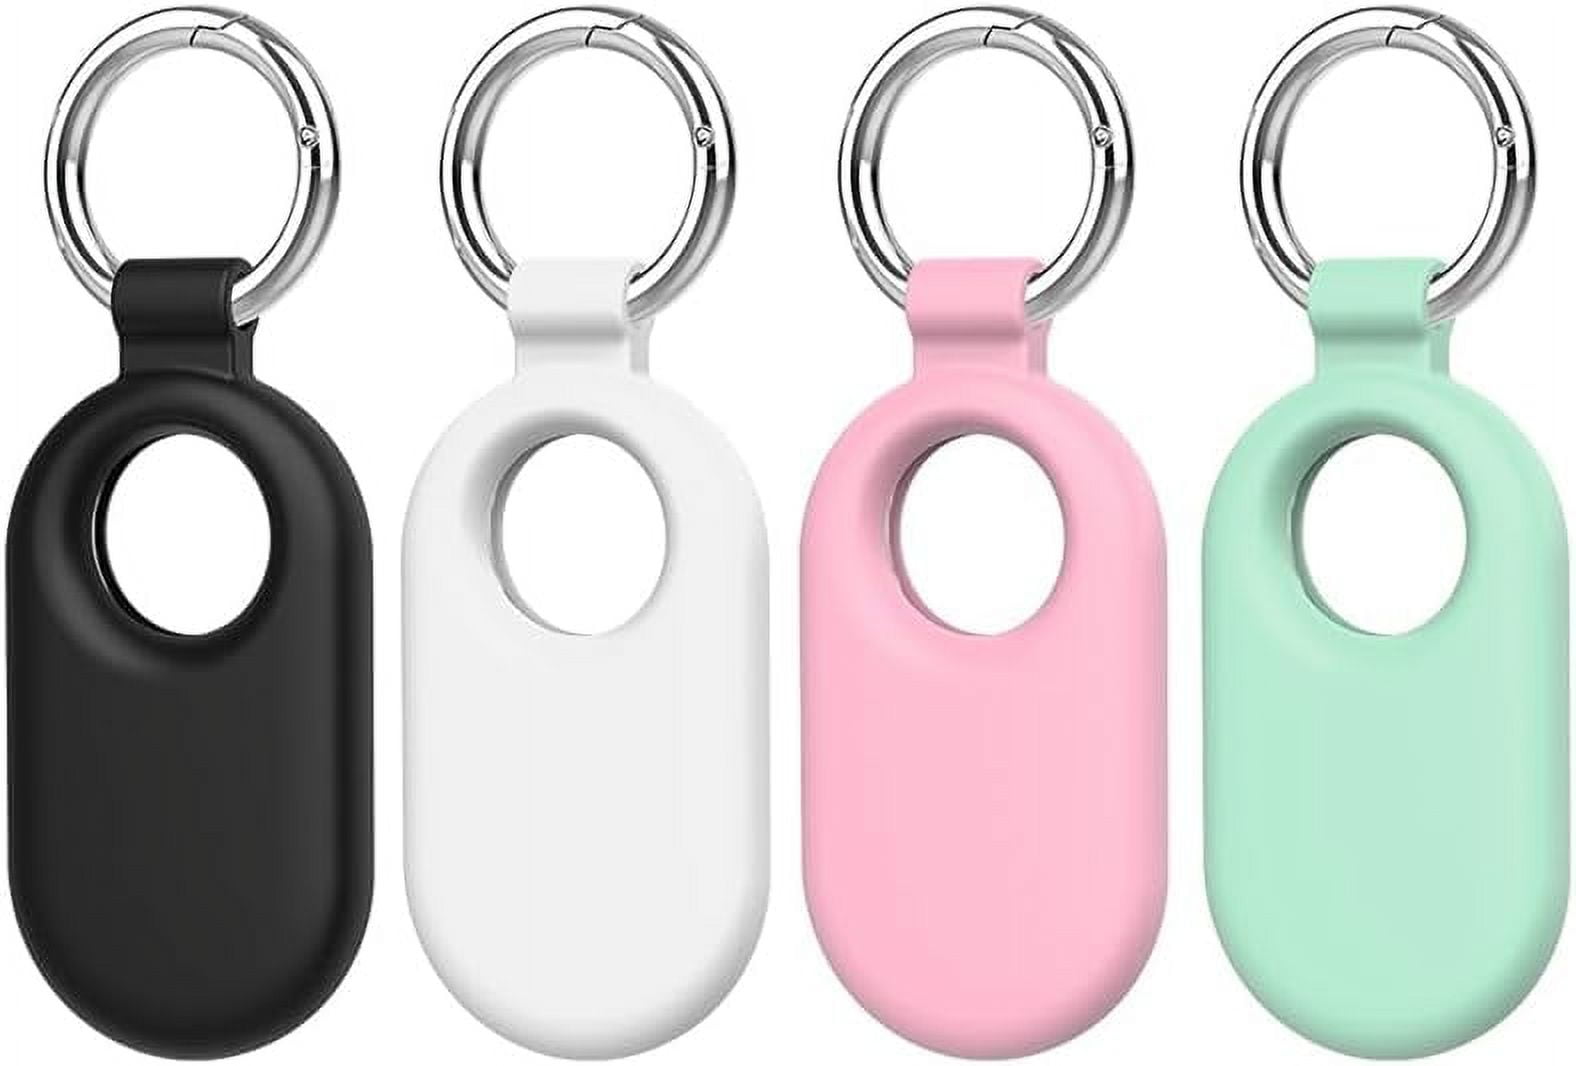 Case Keys for Protective Ring for Galaxy Smart with SmartTag2 for Galaxy Samsung 2 Case, Key 4pcs Tag Silicone Frusde